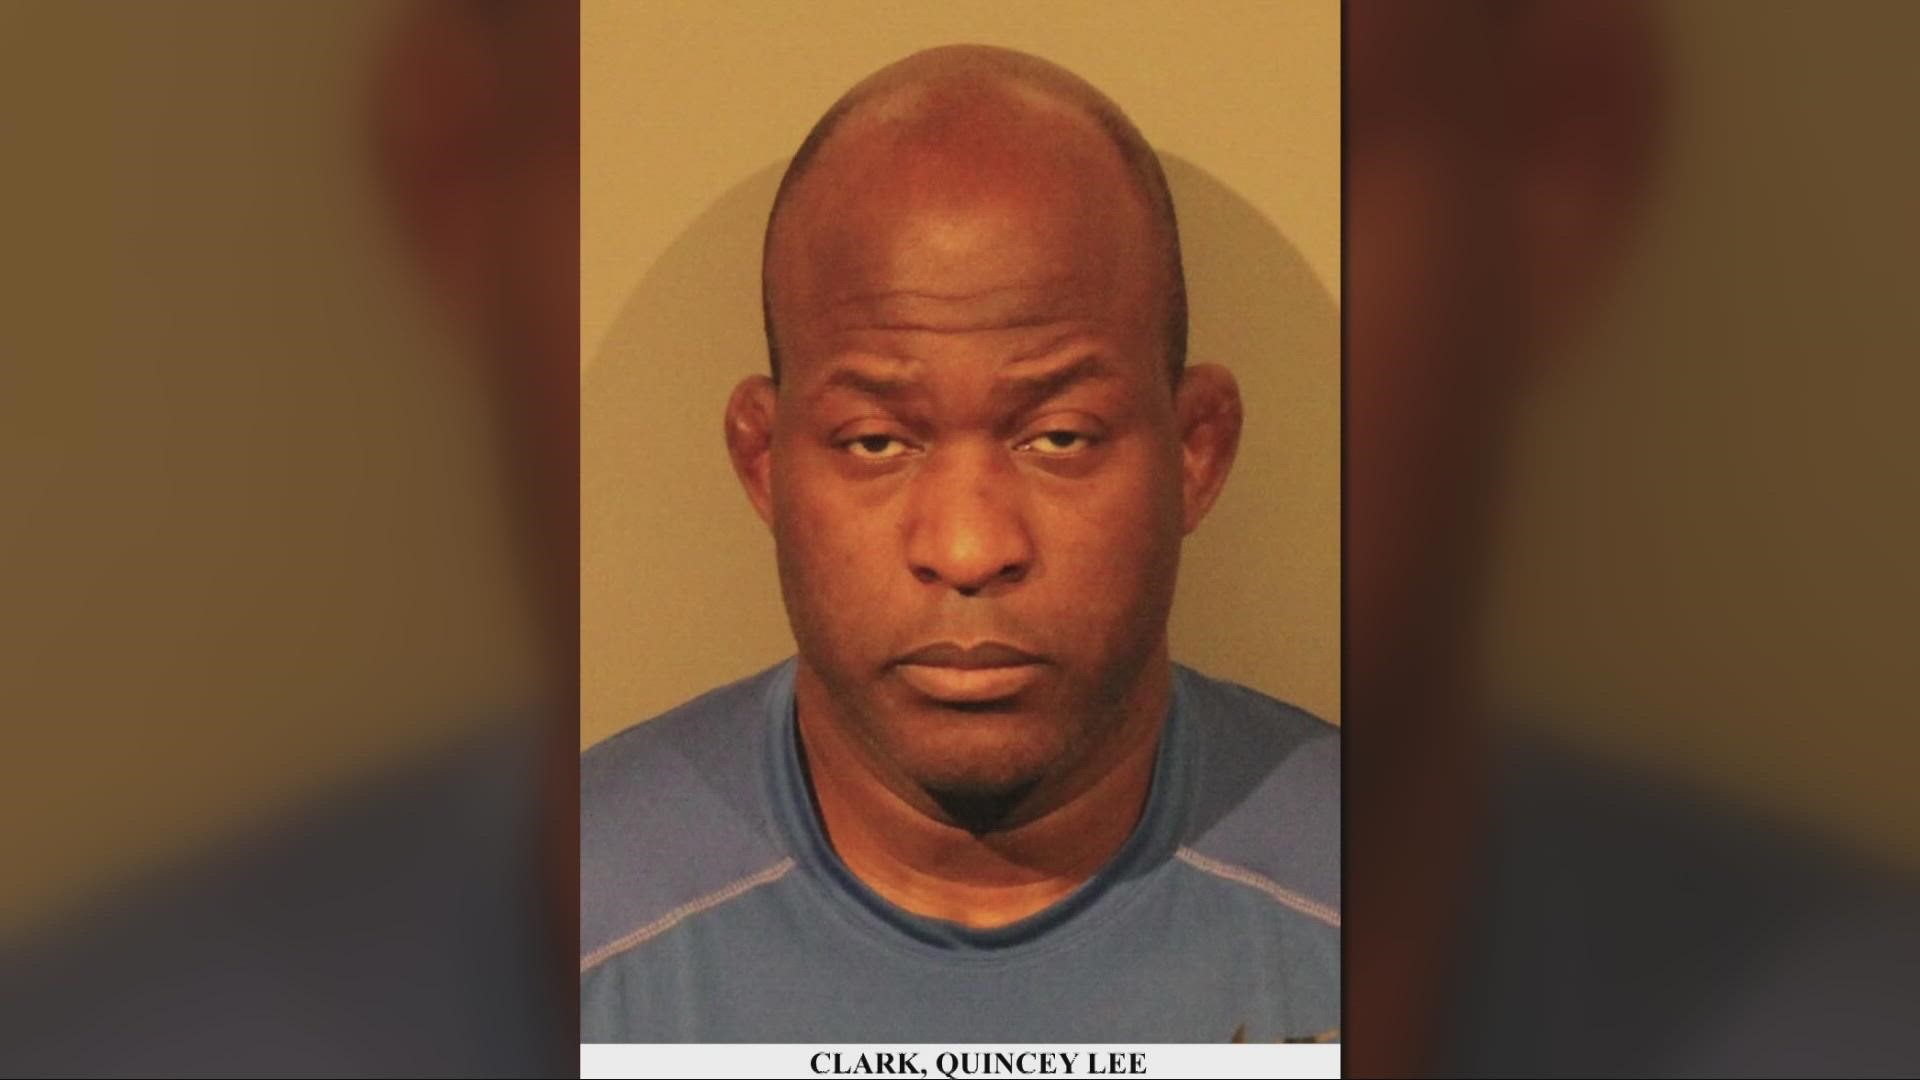 Roseville police told ABC10 they recently arrested 50-year-old Quincy Clark on charges including lewd and lascivious acts with a minor under the age of 18 years old.